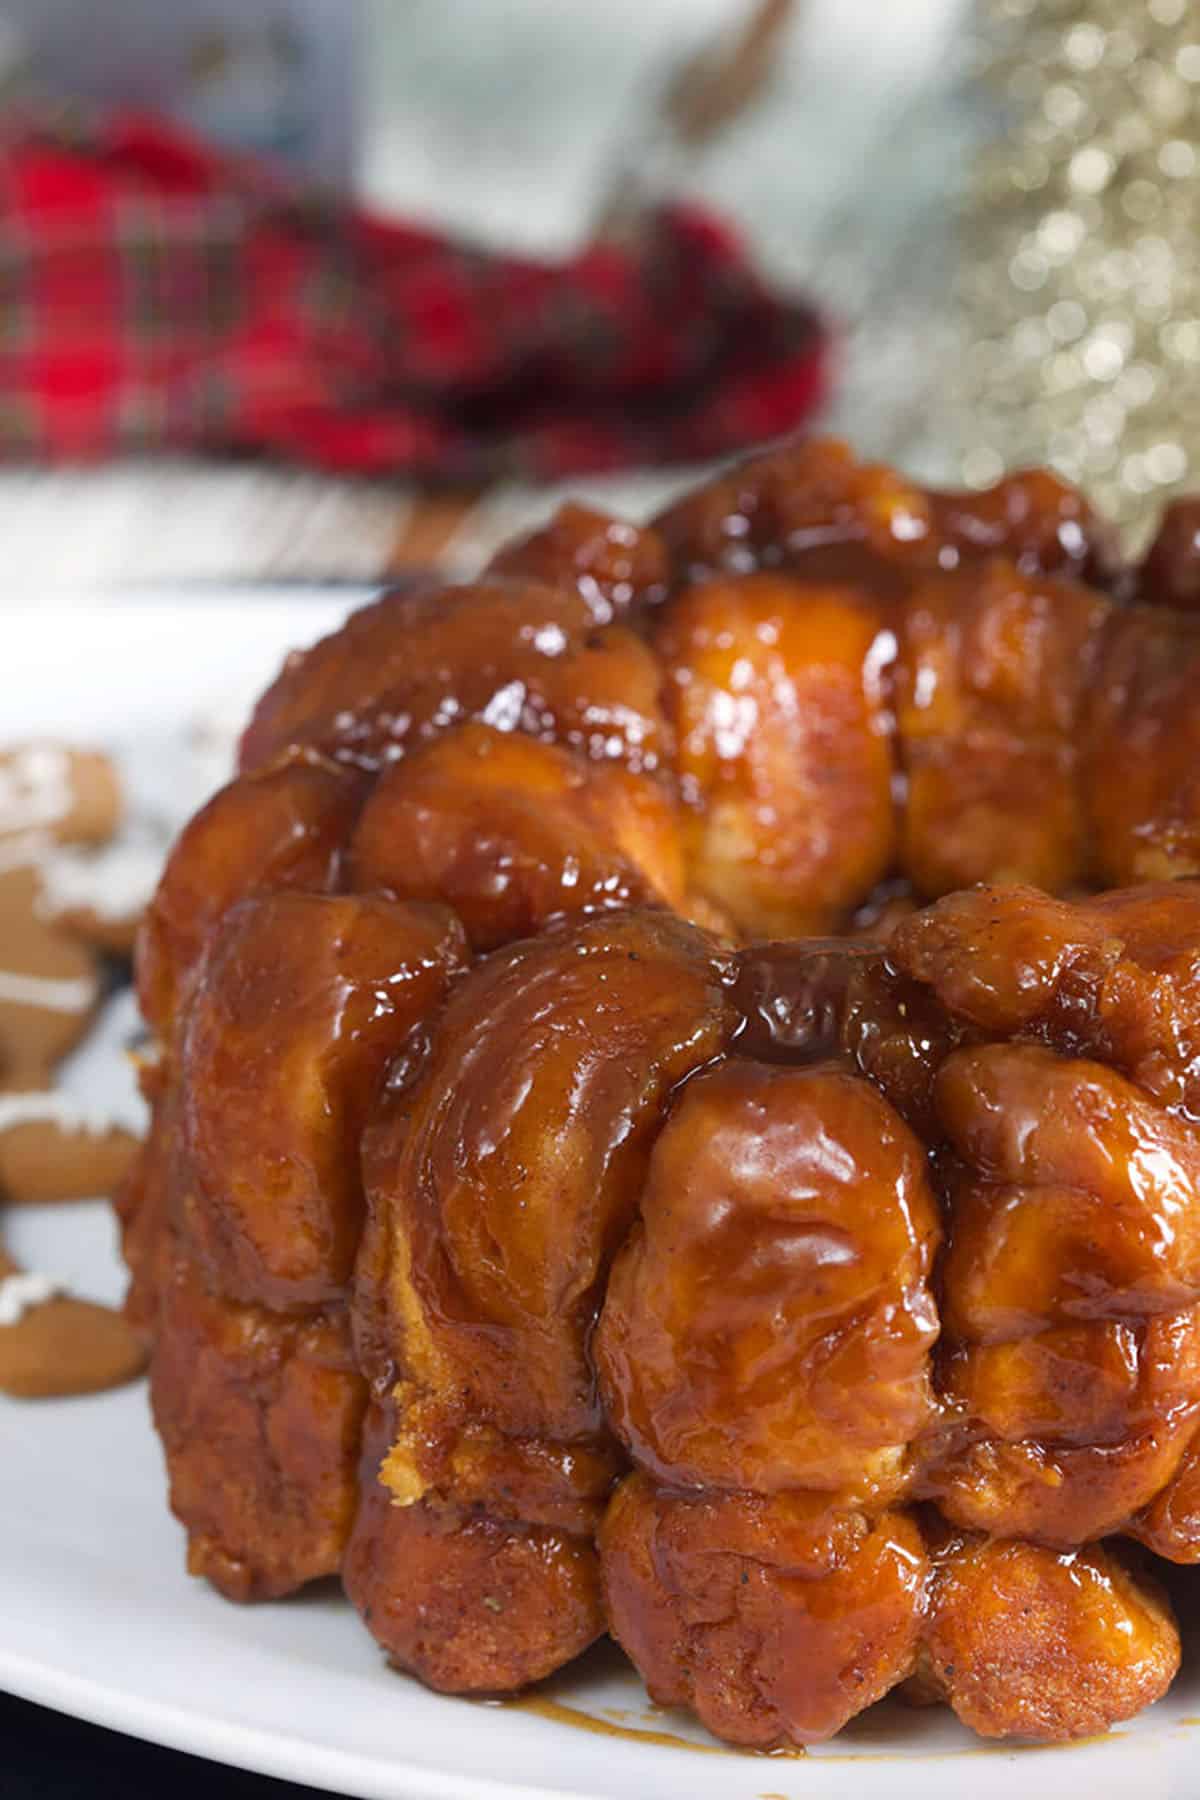 Baked monkey bread is presented on a round white serving platter.